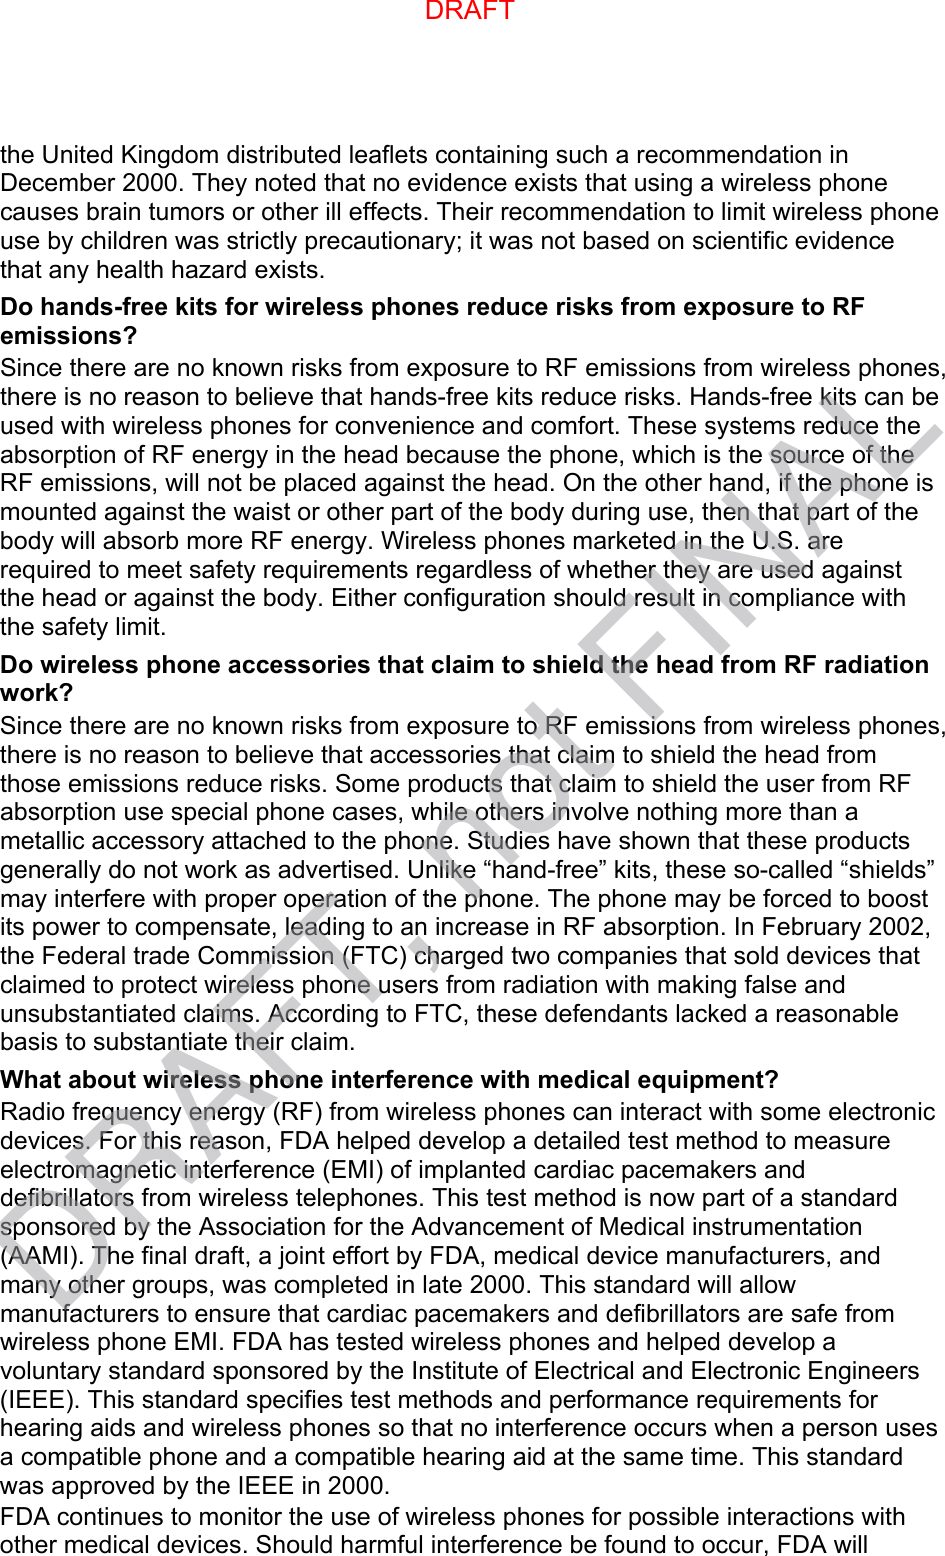 the United Kingdom distributed leaflets containing such a recommendation in December 2000. They noted that no evidence exists that using a wireless phone causes brain tumors or other ill effects. Their recommendation to limit wireless phone use by children was strictly precautionary; it was not based on scientific evidence that any health hazard exists.   Do hands-free kits for wireless phones reduce risks from exposure to RF emissions? Since there are no known risks from exposure to RF emissions from wireless phones, there is no reason to believe that hands-free kits reduce risks. Hands-free kits can be used with wireless phones for convenience and comfort. These systems reduce the absorption of RF energy in the head because the phone, which is the source of the RF emissions, will not be placed against the head. On the other hand, if the phone is mounted against the waist or other part of the body during use, then that part of the body will absorb more RF energy. Wireless phones marketed in the U.S. are required to meet safety requirements regardless of whether they are used against the head or against the body. Either configuration should result in compliance with the safety limit. Do wireless phone accessories that claim to shield the head from RF radiation work? Since there are no known risks from exposure to RF emissions from wireless phones, there is no reason to believe that accessories that claim to shield the head from those emissions reduce risks. Some products that claim to shield the user from RF absorption use special phone cases, while others involve nothing more than a metallic accessory attached to the phone. Studies have shown that these products generally do not work as advertised. Unlike “hand-free” kits, these so-called “shields” may interfere with proper operation of the phone. The phone may be forced to boost its power to compensate, leading to an increase in RF absorption. In February 2002, the Federal trade Commission (FTC) charged two companies that sold devices that claimed to protect wireless phone users from radiation with making false and unsubstantiated claims. According to FTC, these defendants lacked a reasonable basis to substantiate their claim. What about wireless phone interference with medical equipment? Radio frequency energy (RF) from wireless phones can interact with some electronic devices. For this reason, FDA helped develop a detailed test method to measure electromagnetic interference (EMI) of implanted cardiac pacemakers and defibrillators from wireless telephones. This test method is now part of a standard sponsored by the Association for the Advancement of Medical instrumentation (AAMI). The final draft, a joint effort by FDA, medical device manufacturers, and many other groups, was completed in late 2000. This standard will allow manufacturers to ensure that cardiac pacemakers and defibrillators are safe from wireless phone EMI. FDA has tested wireless phones and helped develop a voluntary standard sponsored by the Institute of Electrical and Electronic Engineers (IEEE). This standard specifies test methods and performance requirements for hearing aids and wireless phones so that no interference occurs when a person uses a compatible phone and a compatible hearing aid at the same time. This standard was approved by the IEEE in 2000. FDA continues to monitor the use of wireless phones for possible interactions with other medical devices. Should harmful interference be found to occur, FDA will DRAFTDRAFT, not FINAL